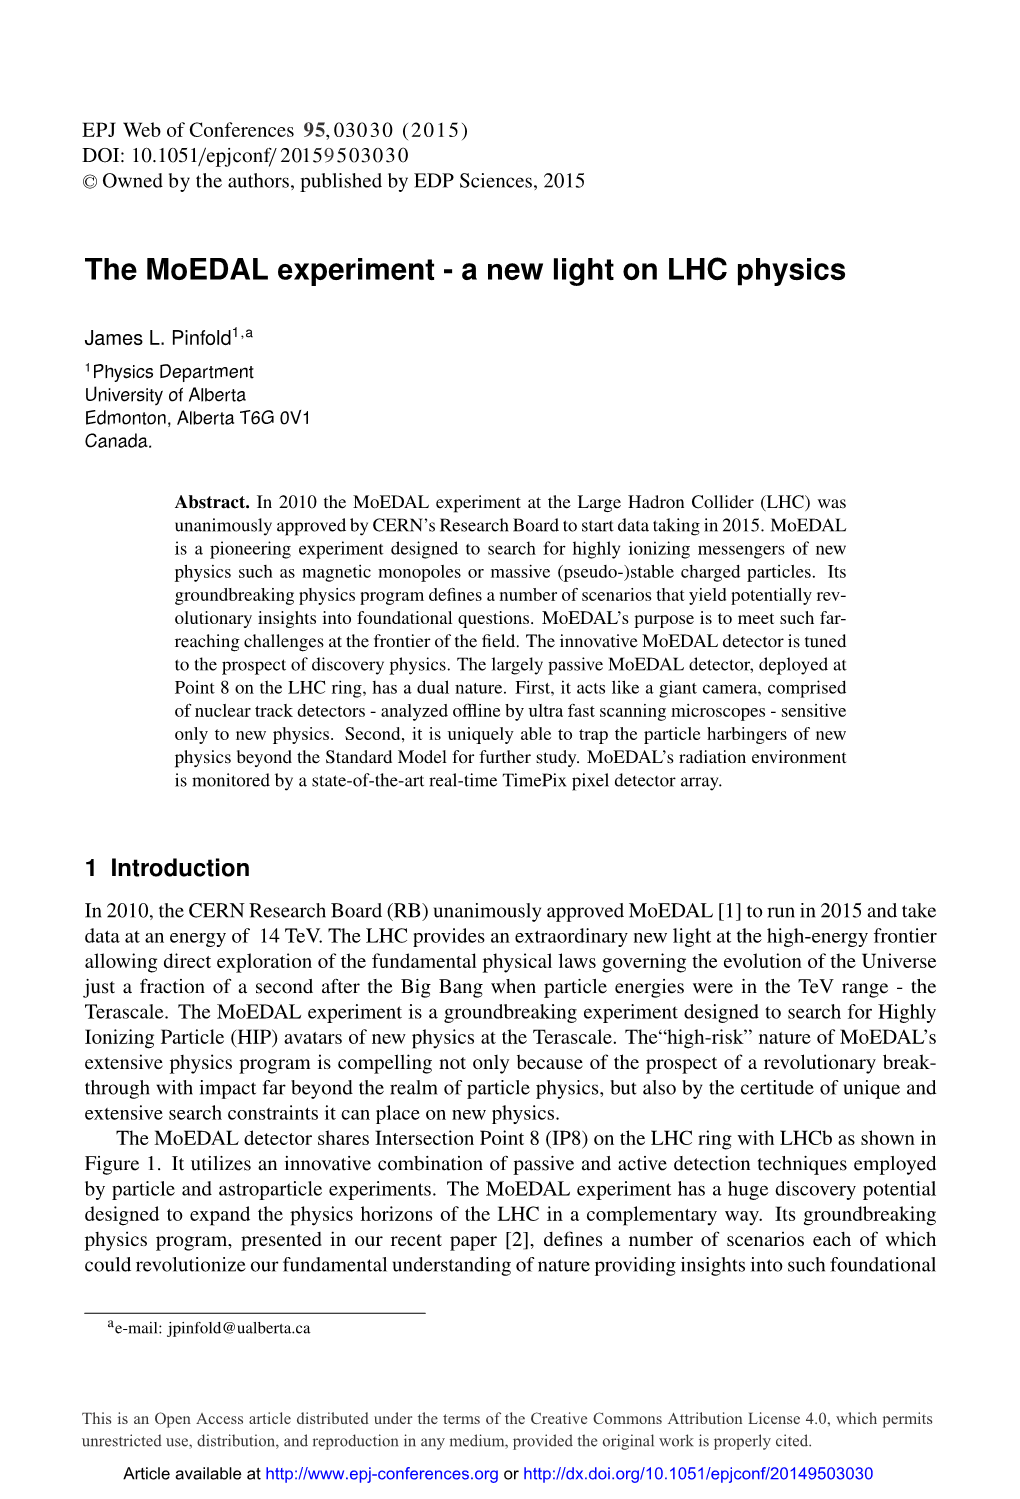 The Moedal Experiment at the Large Hadron Collider (LHC) Was Unanimously Approved by CERN’S Research Board to Start Data Taking in 2015